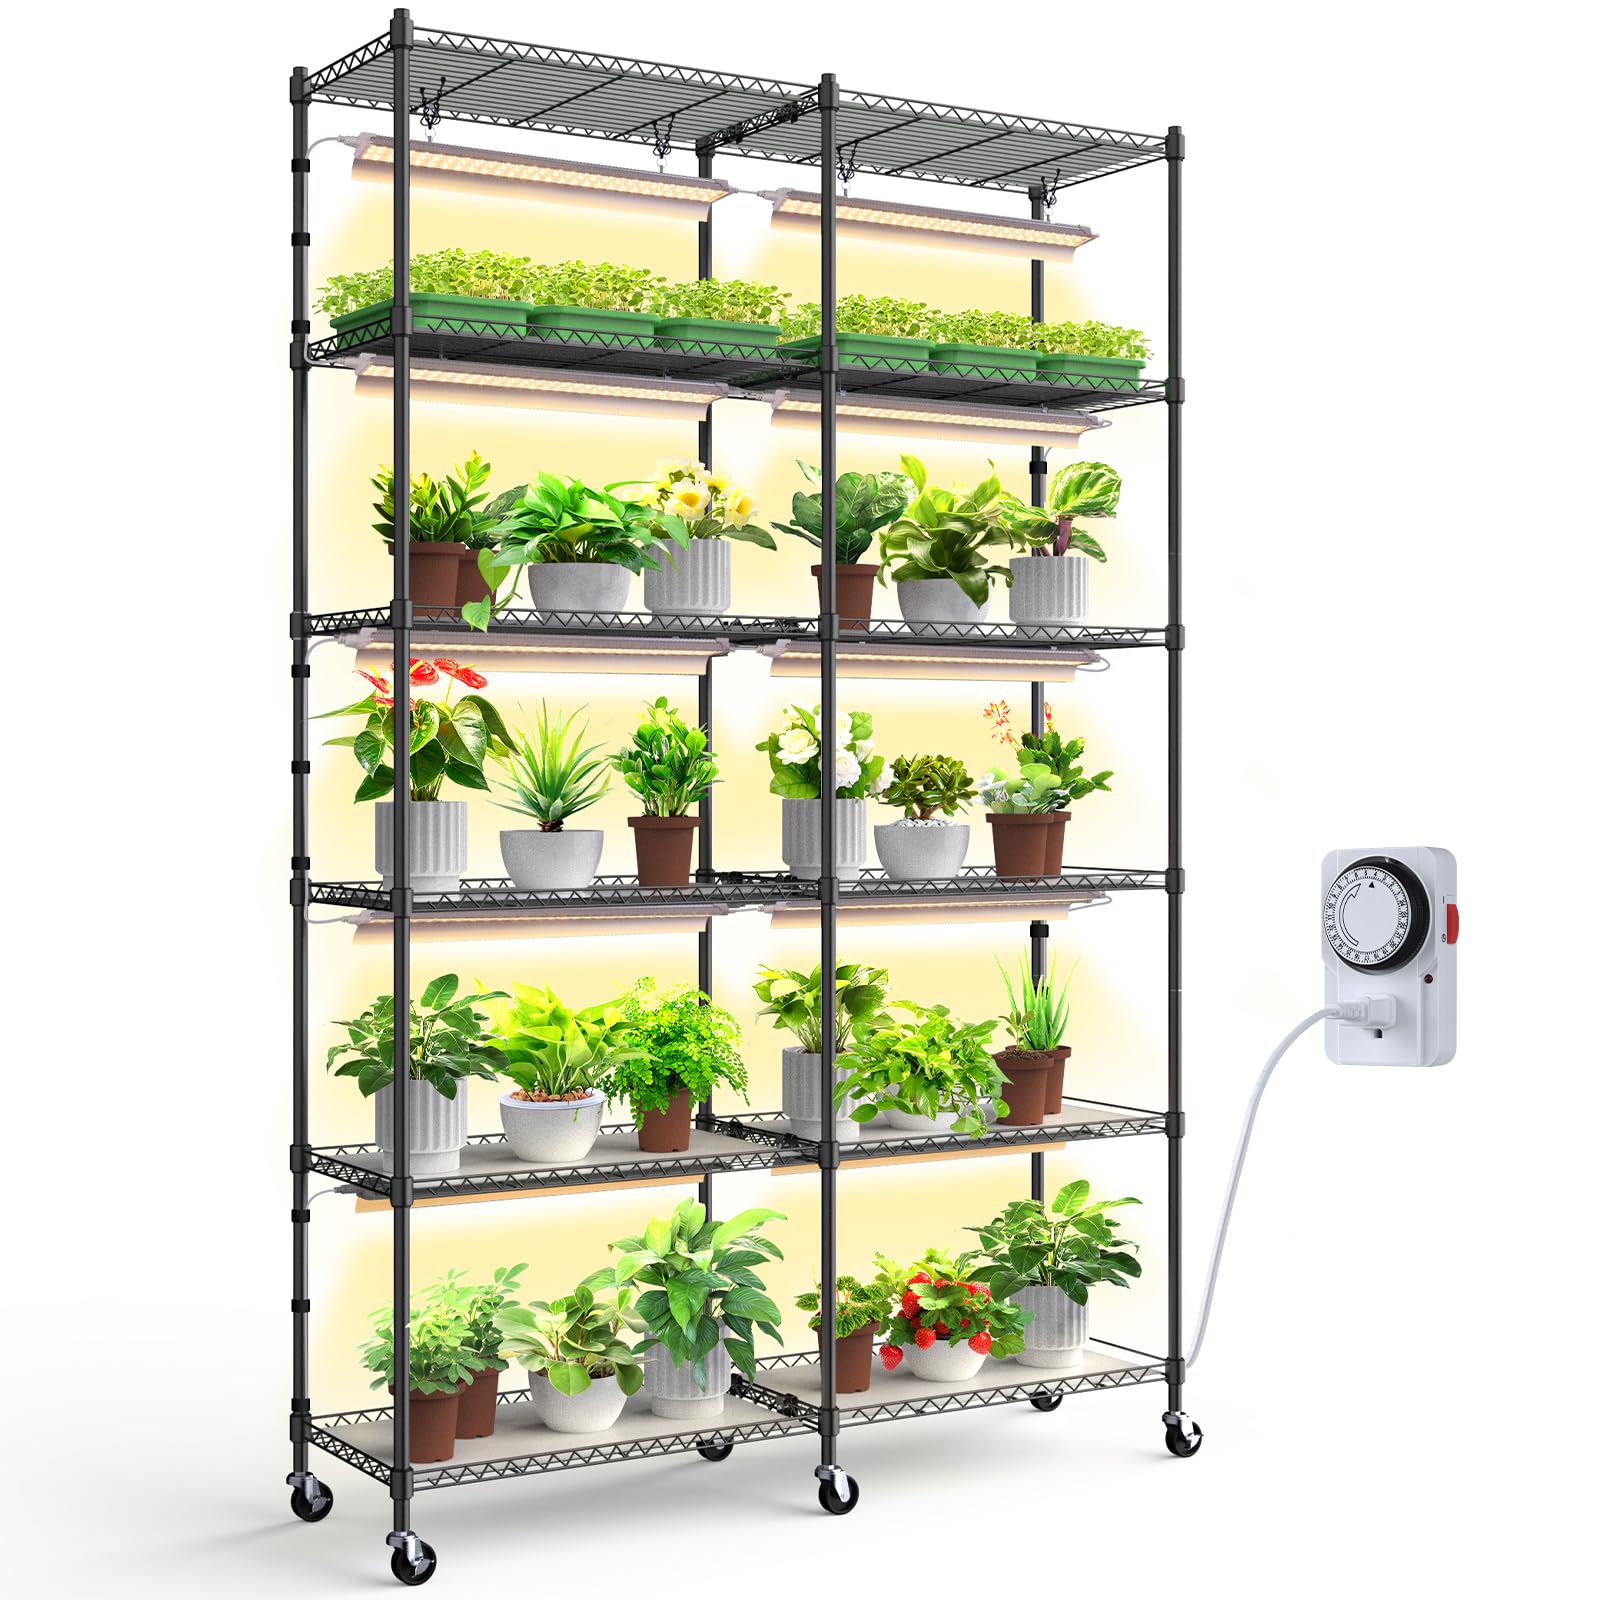 6-Tier Plant Stand with 2020T LED Grow Lights,47x13.8x71IN,20W,10 lights,CJ20LCR